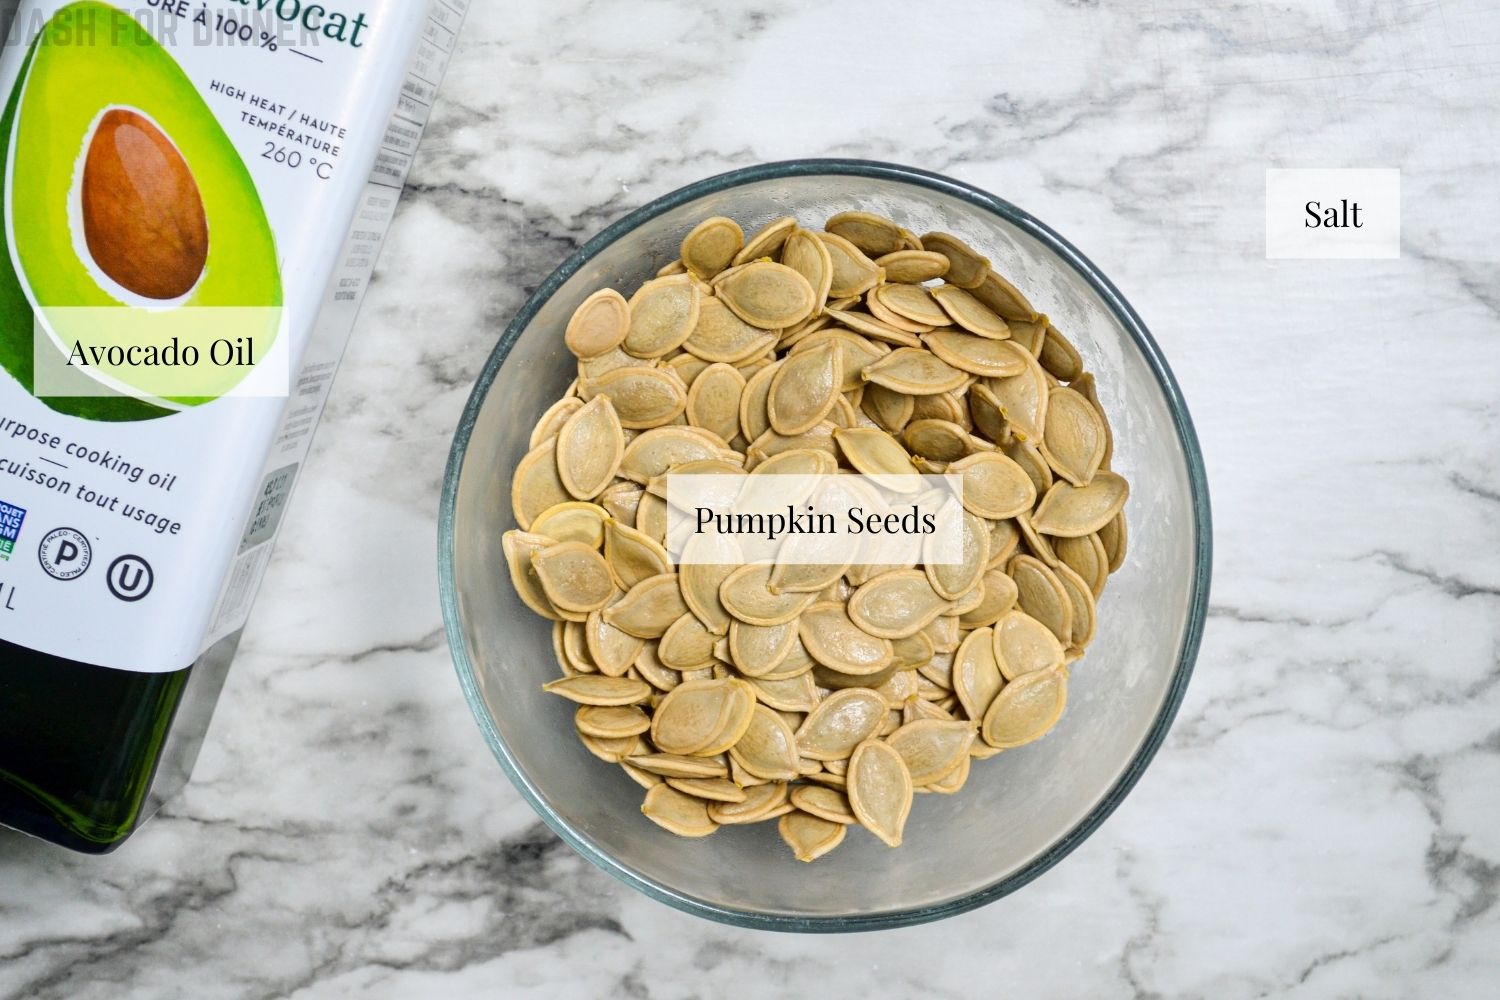 The ingredients needed to get started with roasting pumpkin seeds. You will need salt, cleaned and soaked pumpkin seeds, and salt.